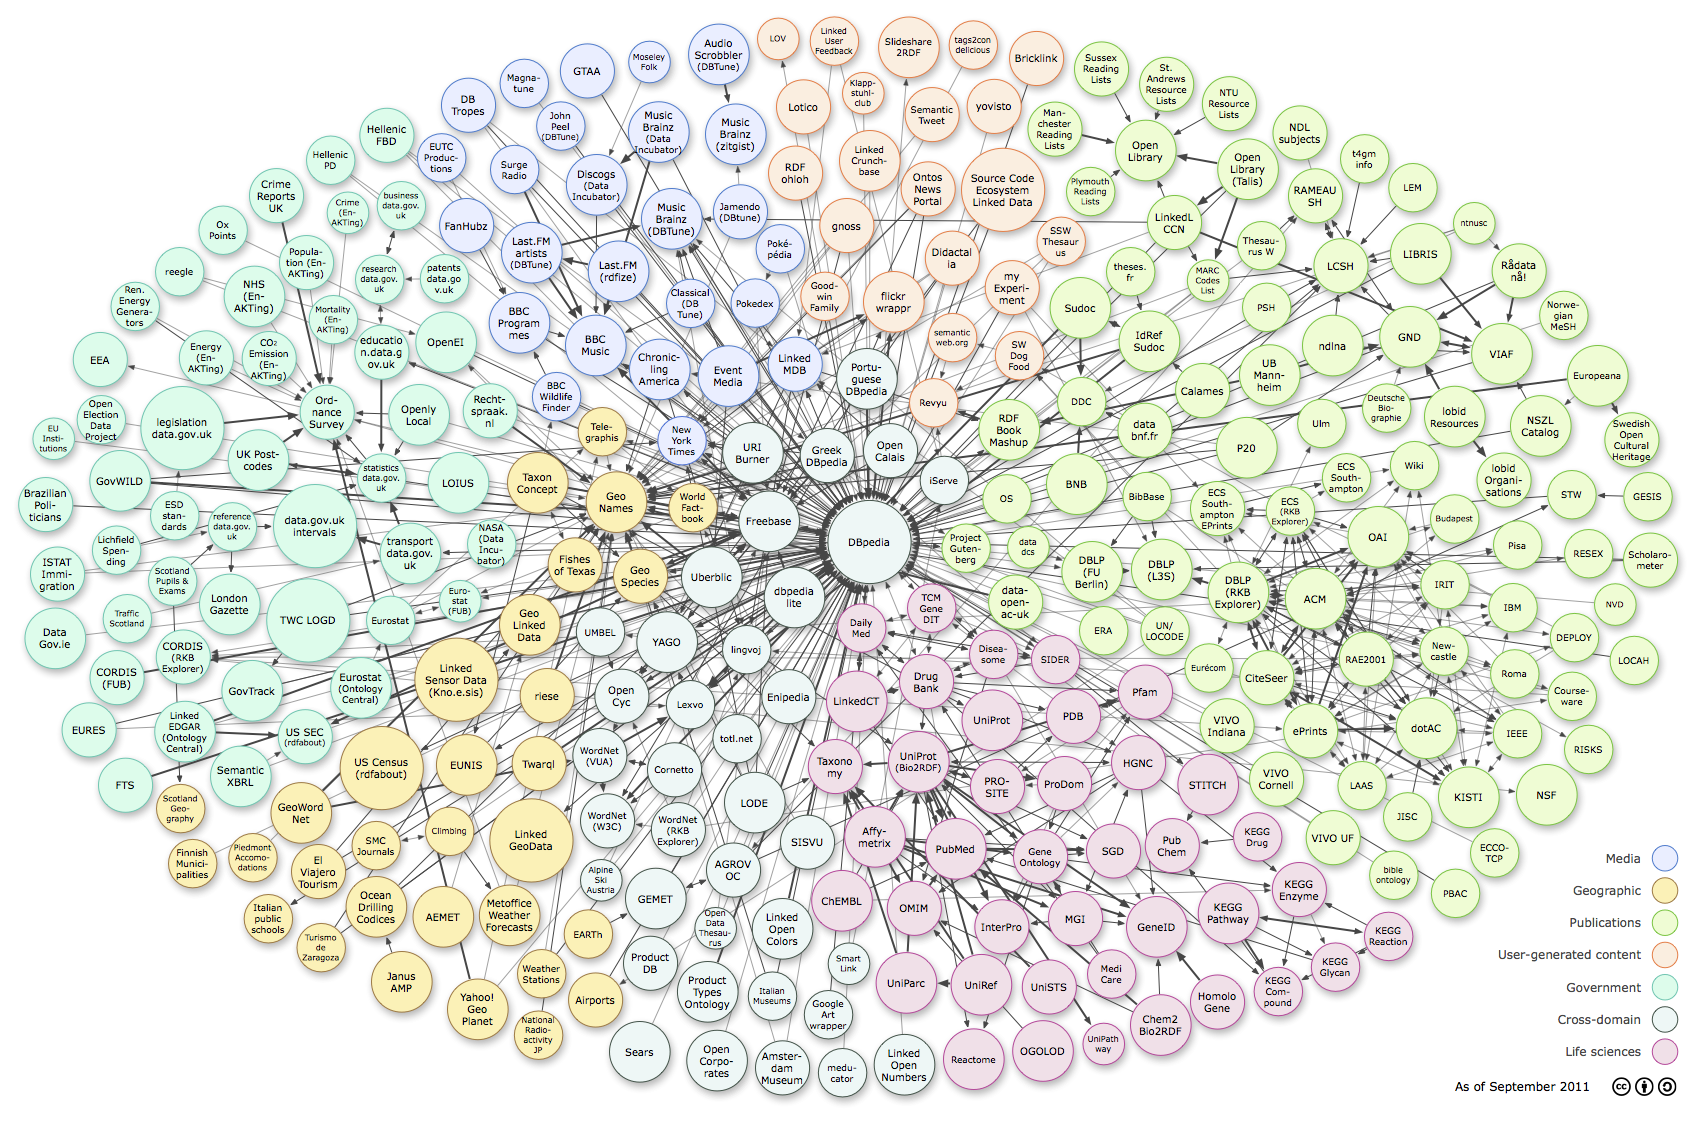 Linked Open Data cloud diagram as of 2011-09